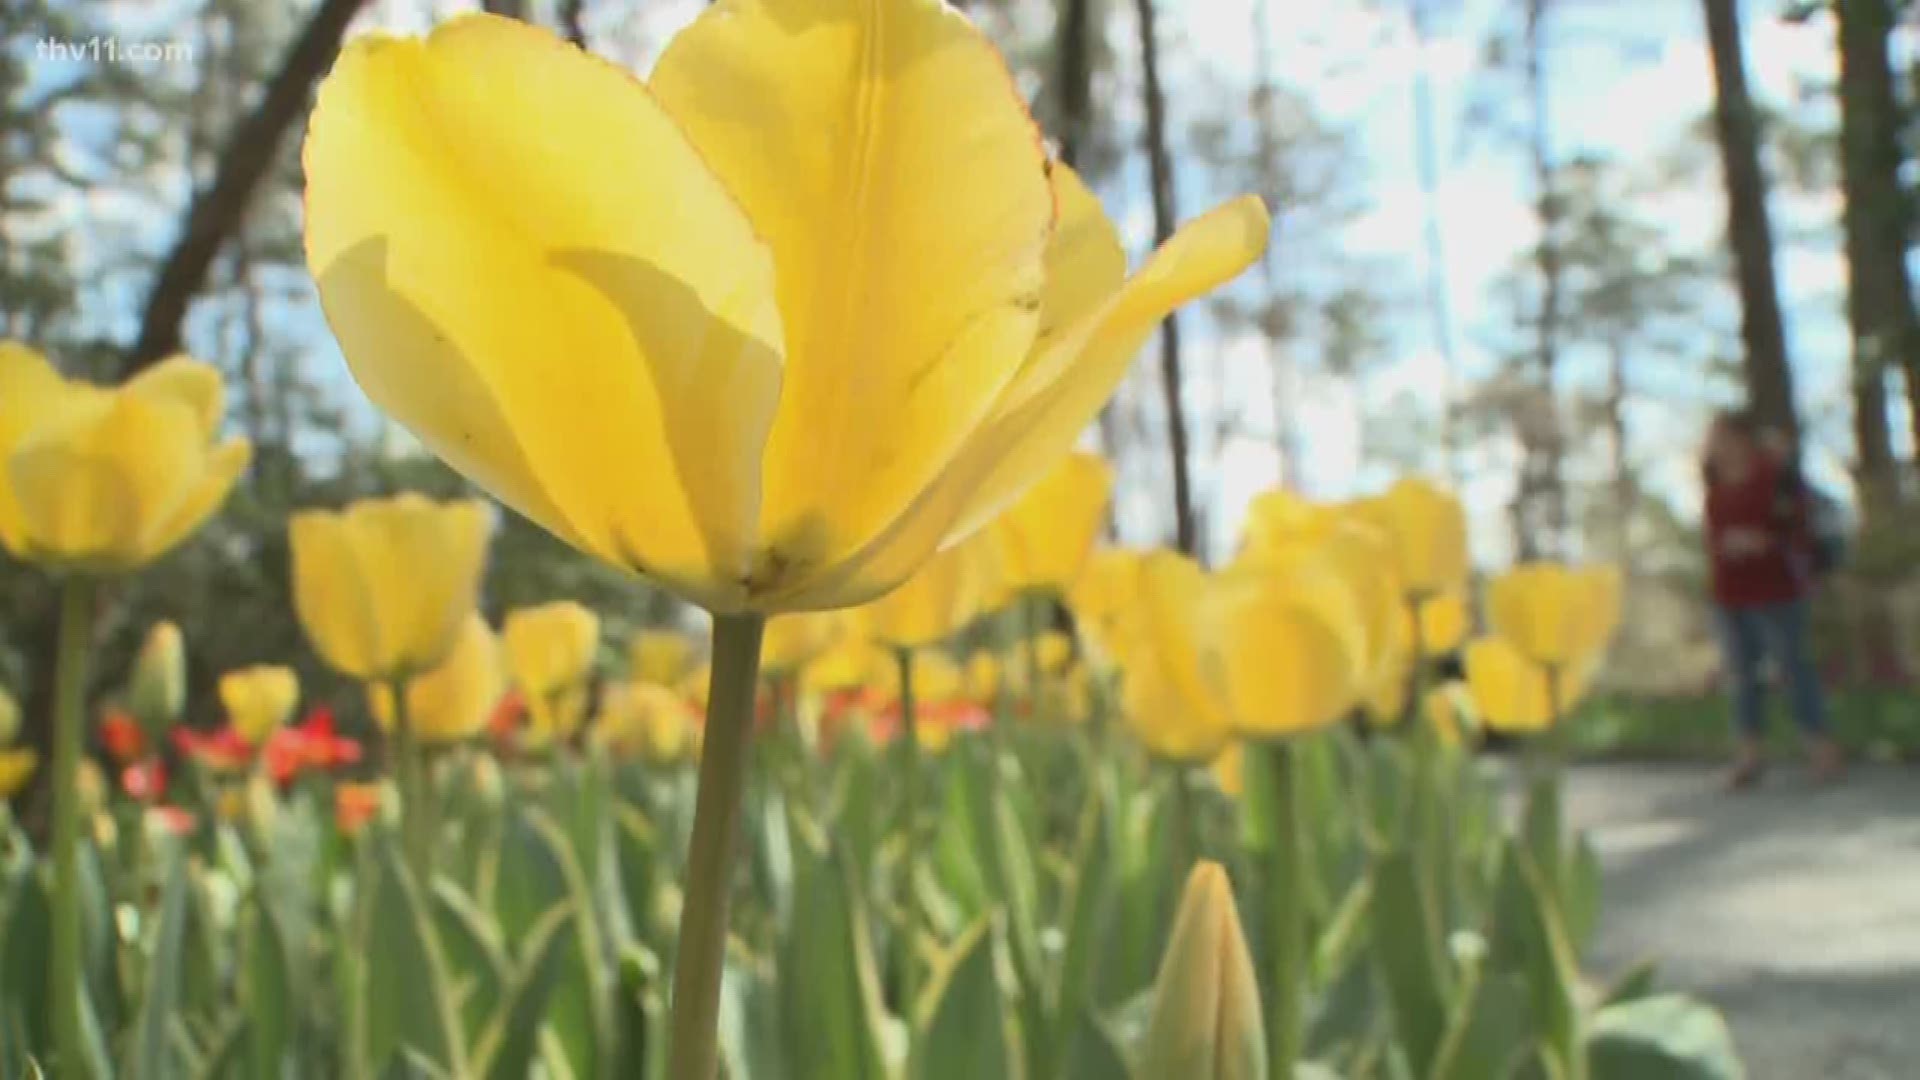 If you just can't wait any longer for spring, you can get your flower fix in Hot Springs.